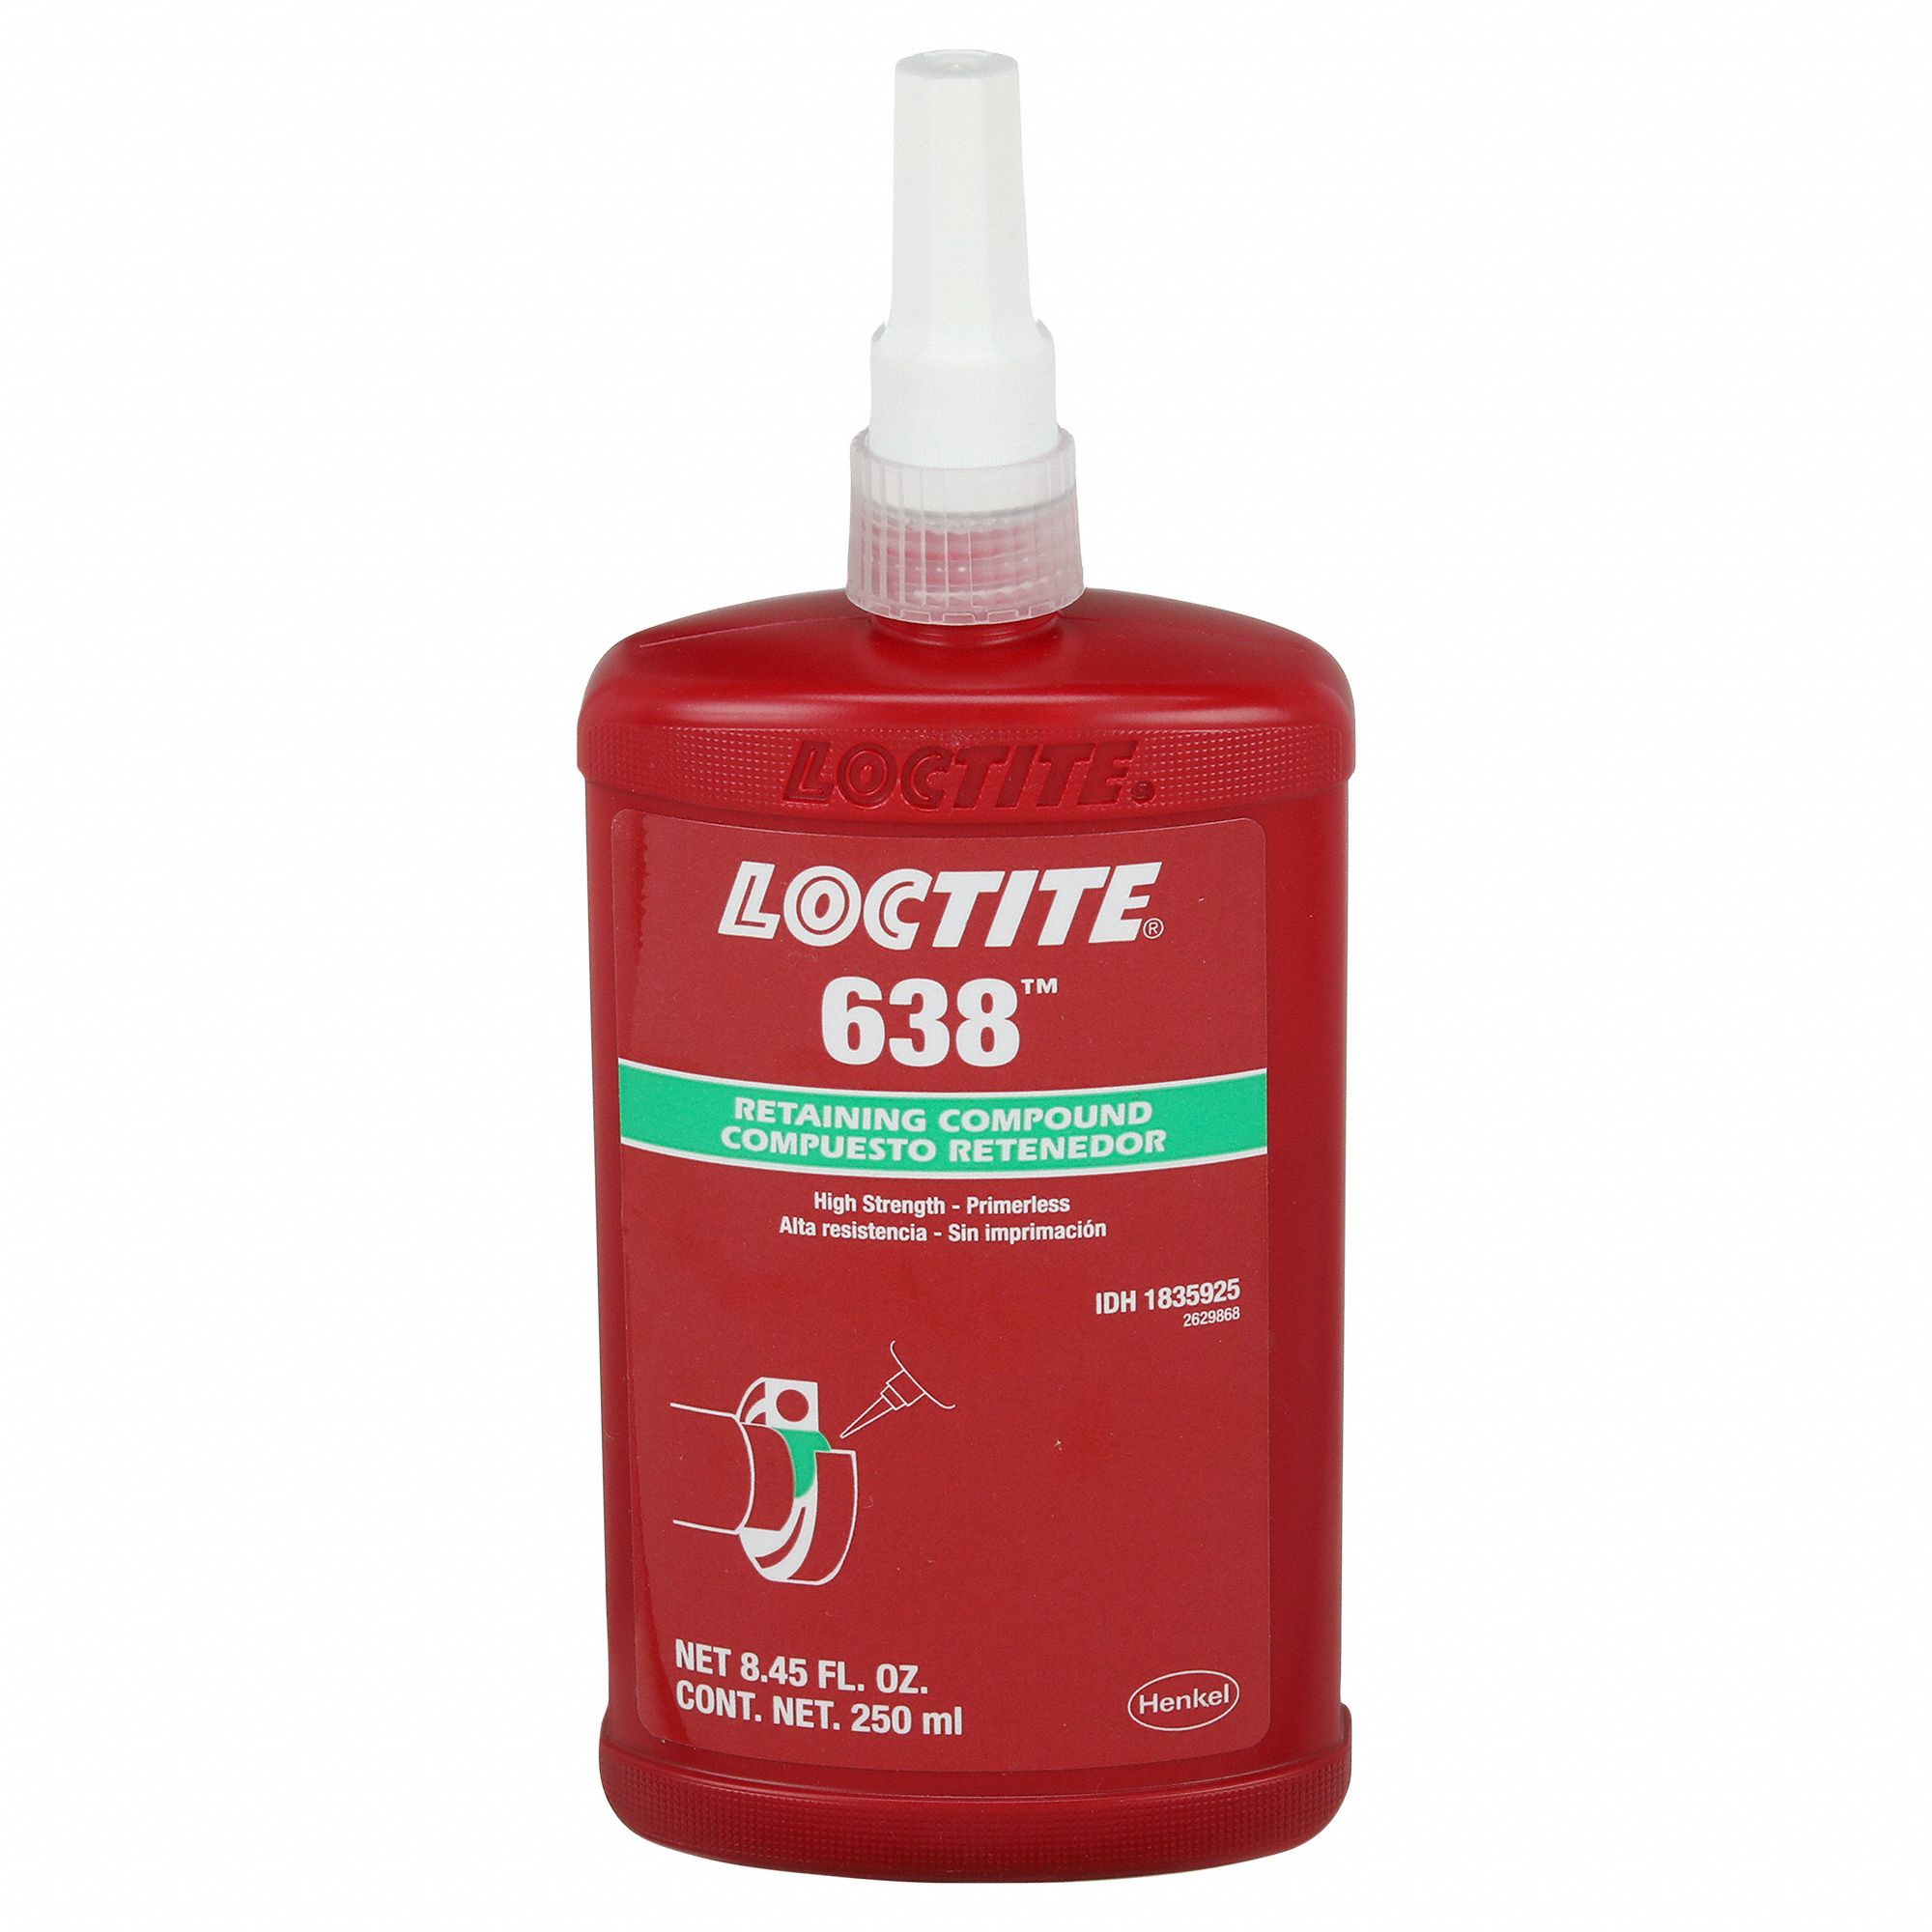 PJME - Loctite 3020 and Athena gaskets. 2 high quality products.  #athenagaskets #apriliars125 #loctite